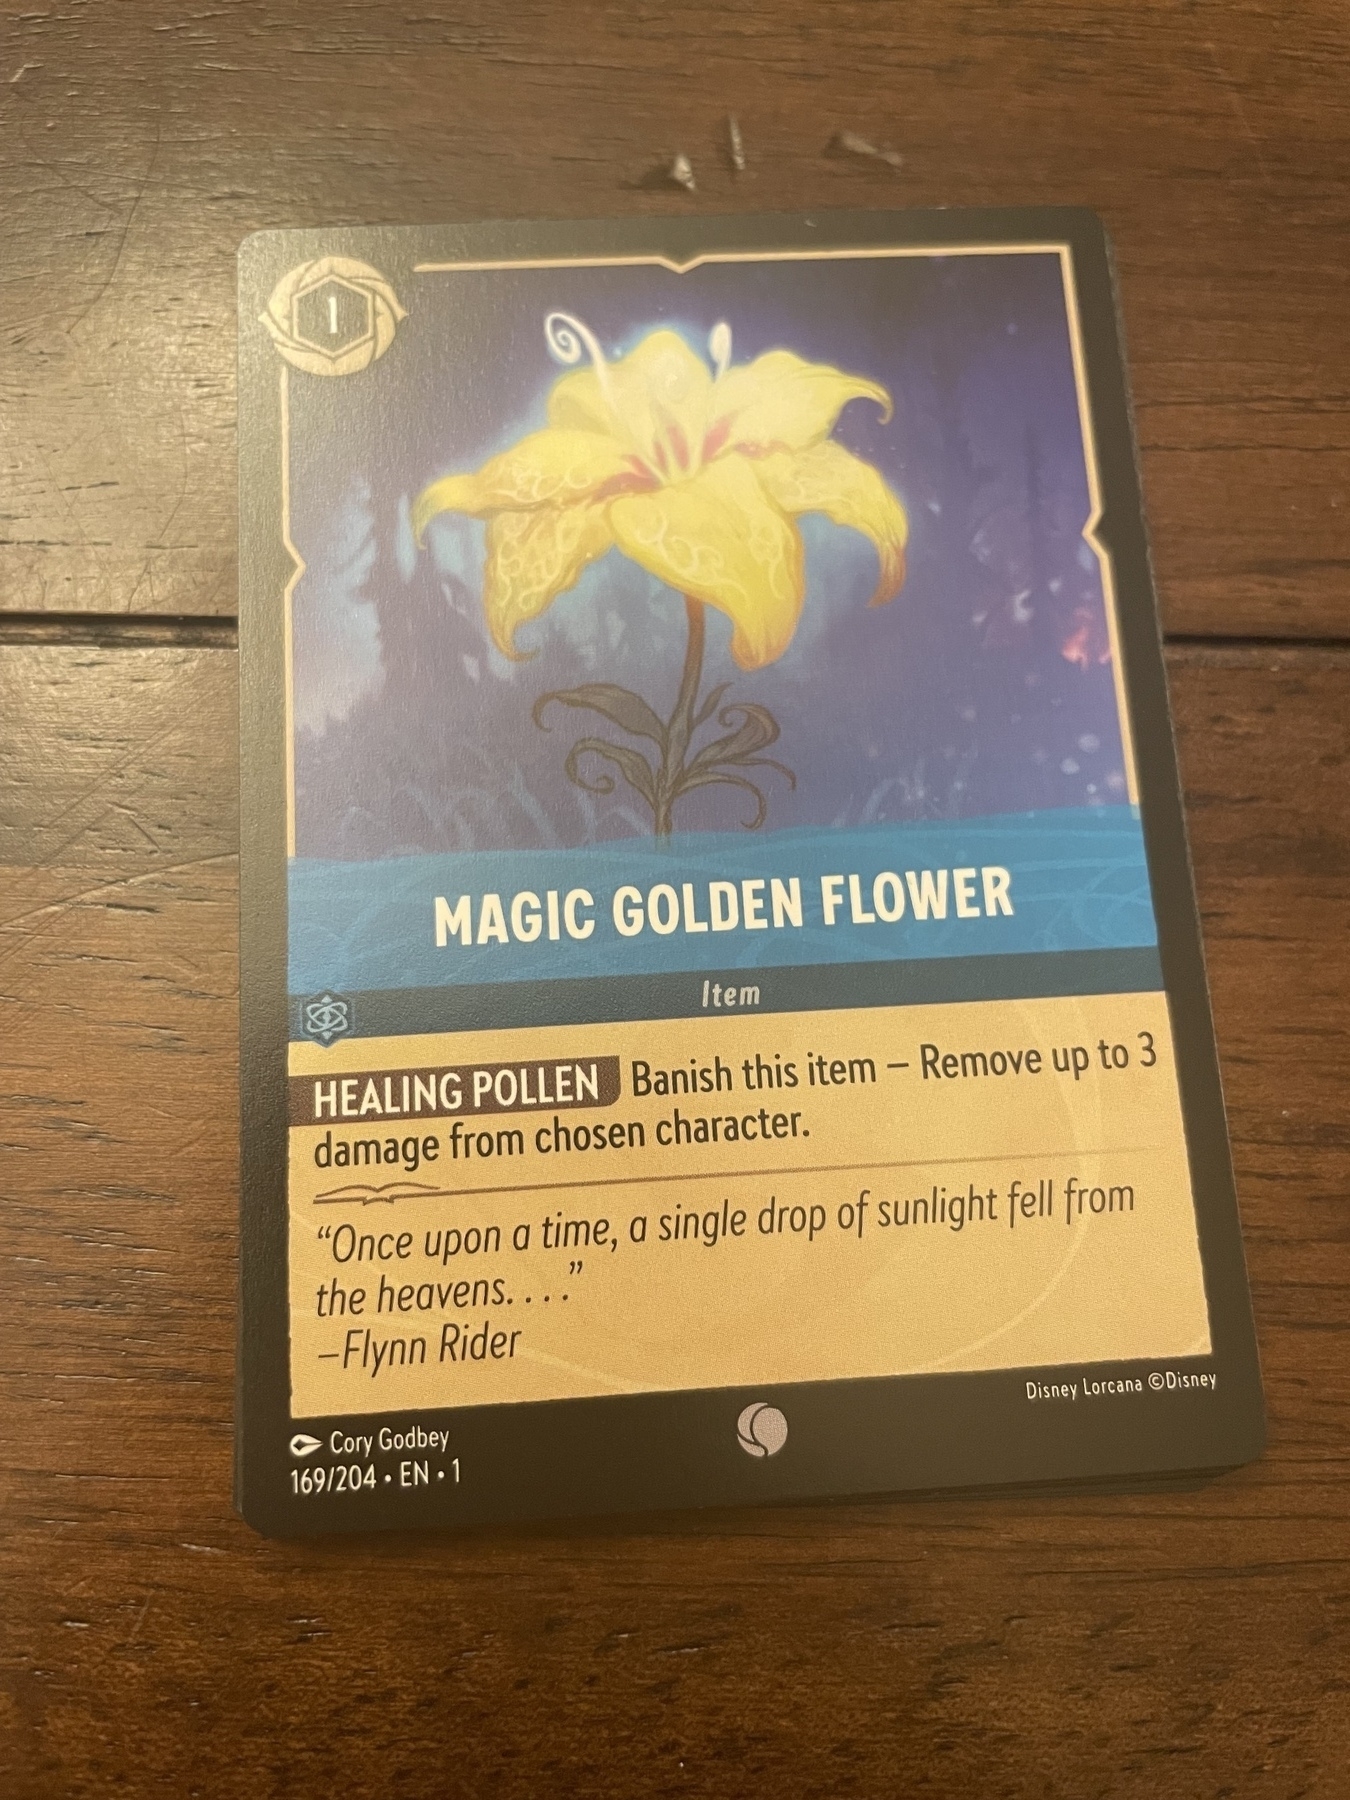 Picture of the “Magic Golden Flower” card from Disney’s Lorcana trading card game